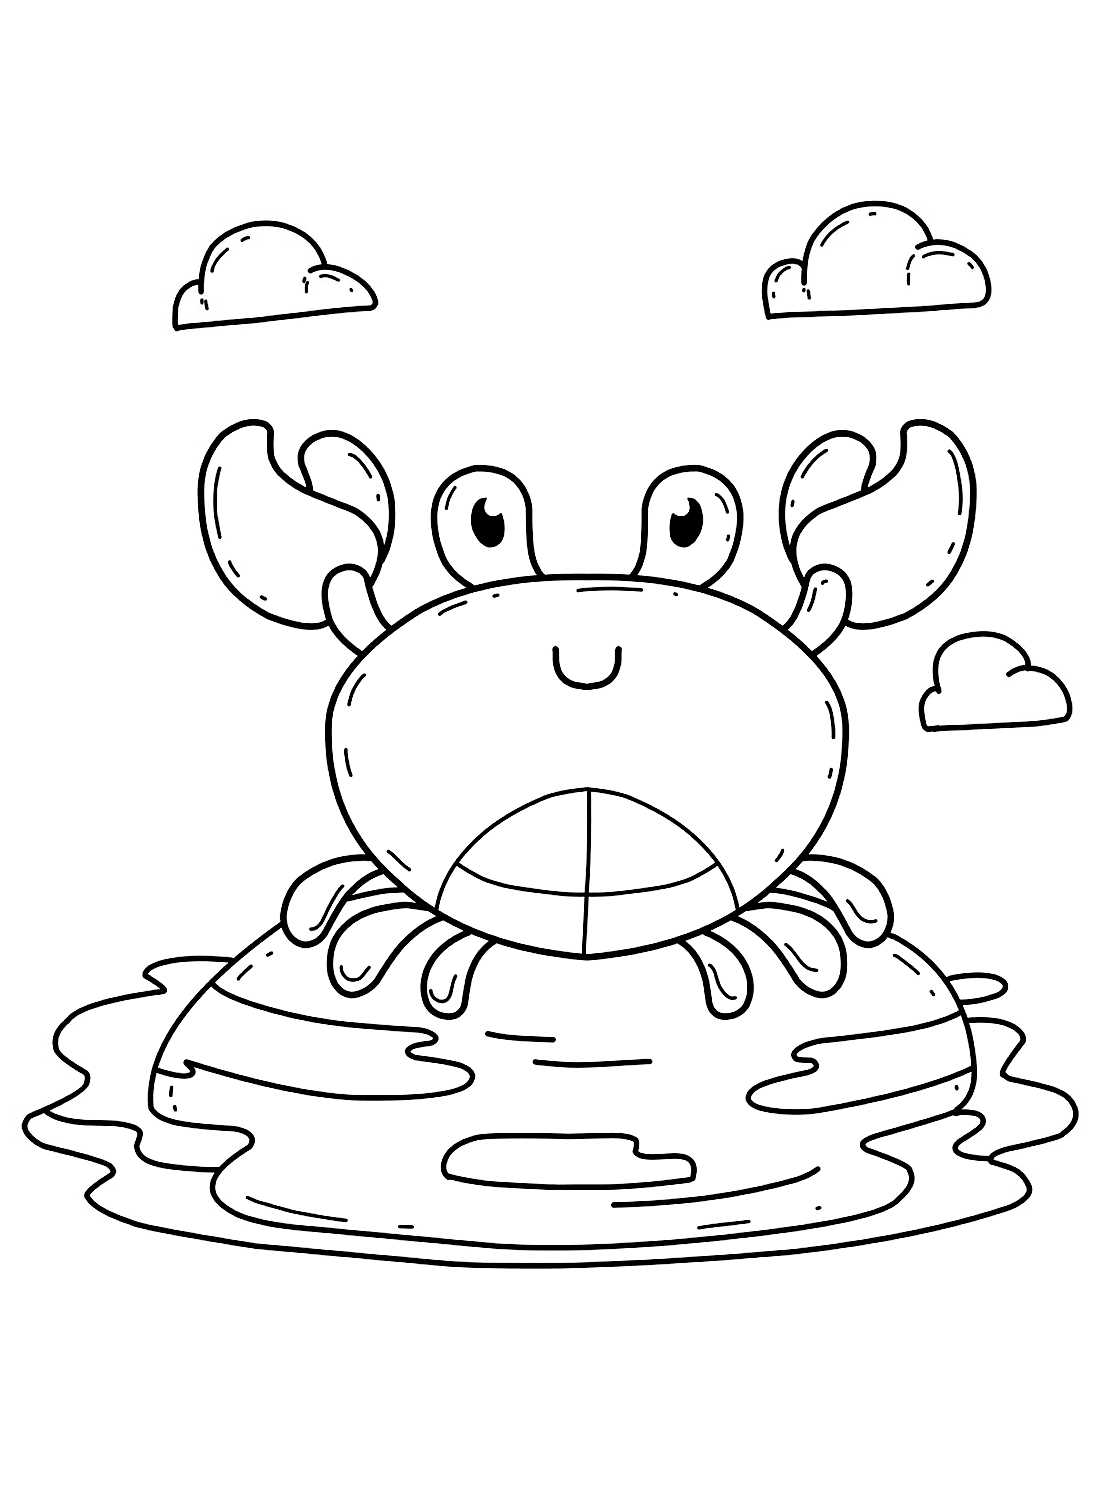 Adorable Crab Coloring Picture from Crab